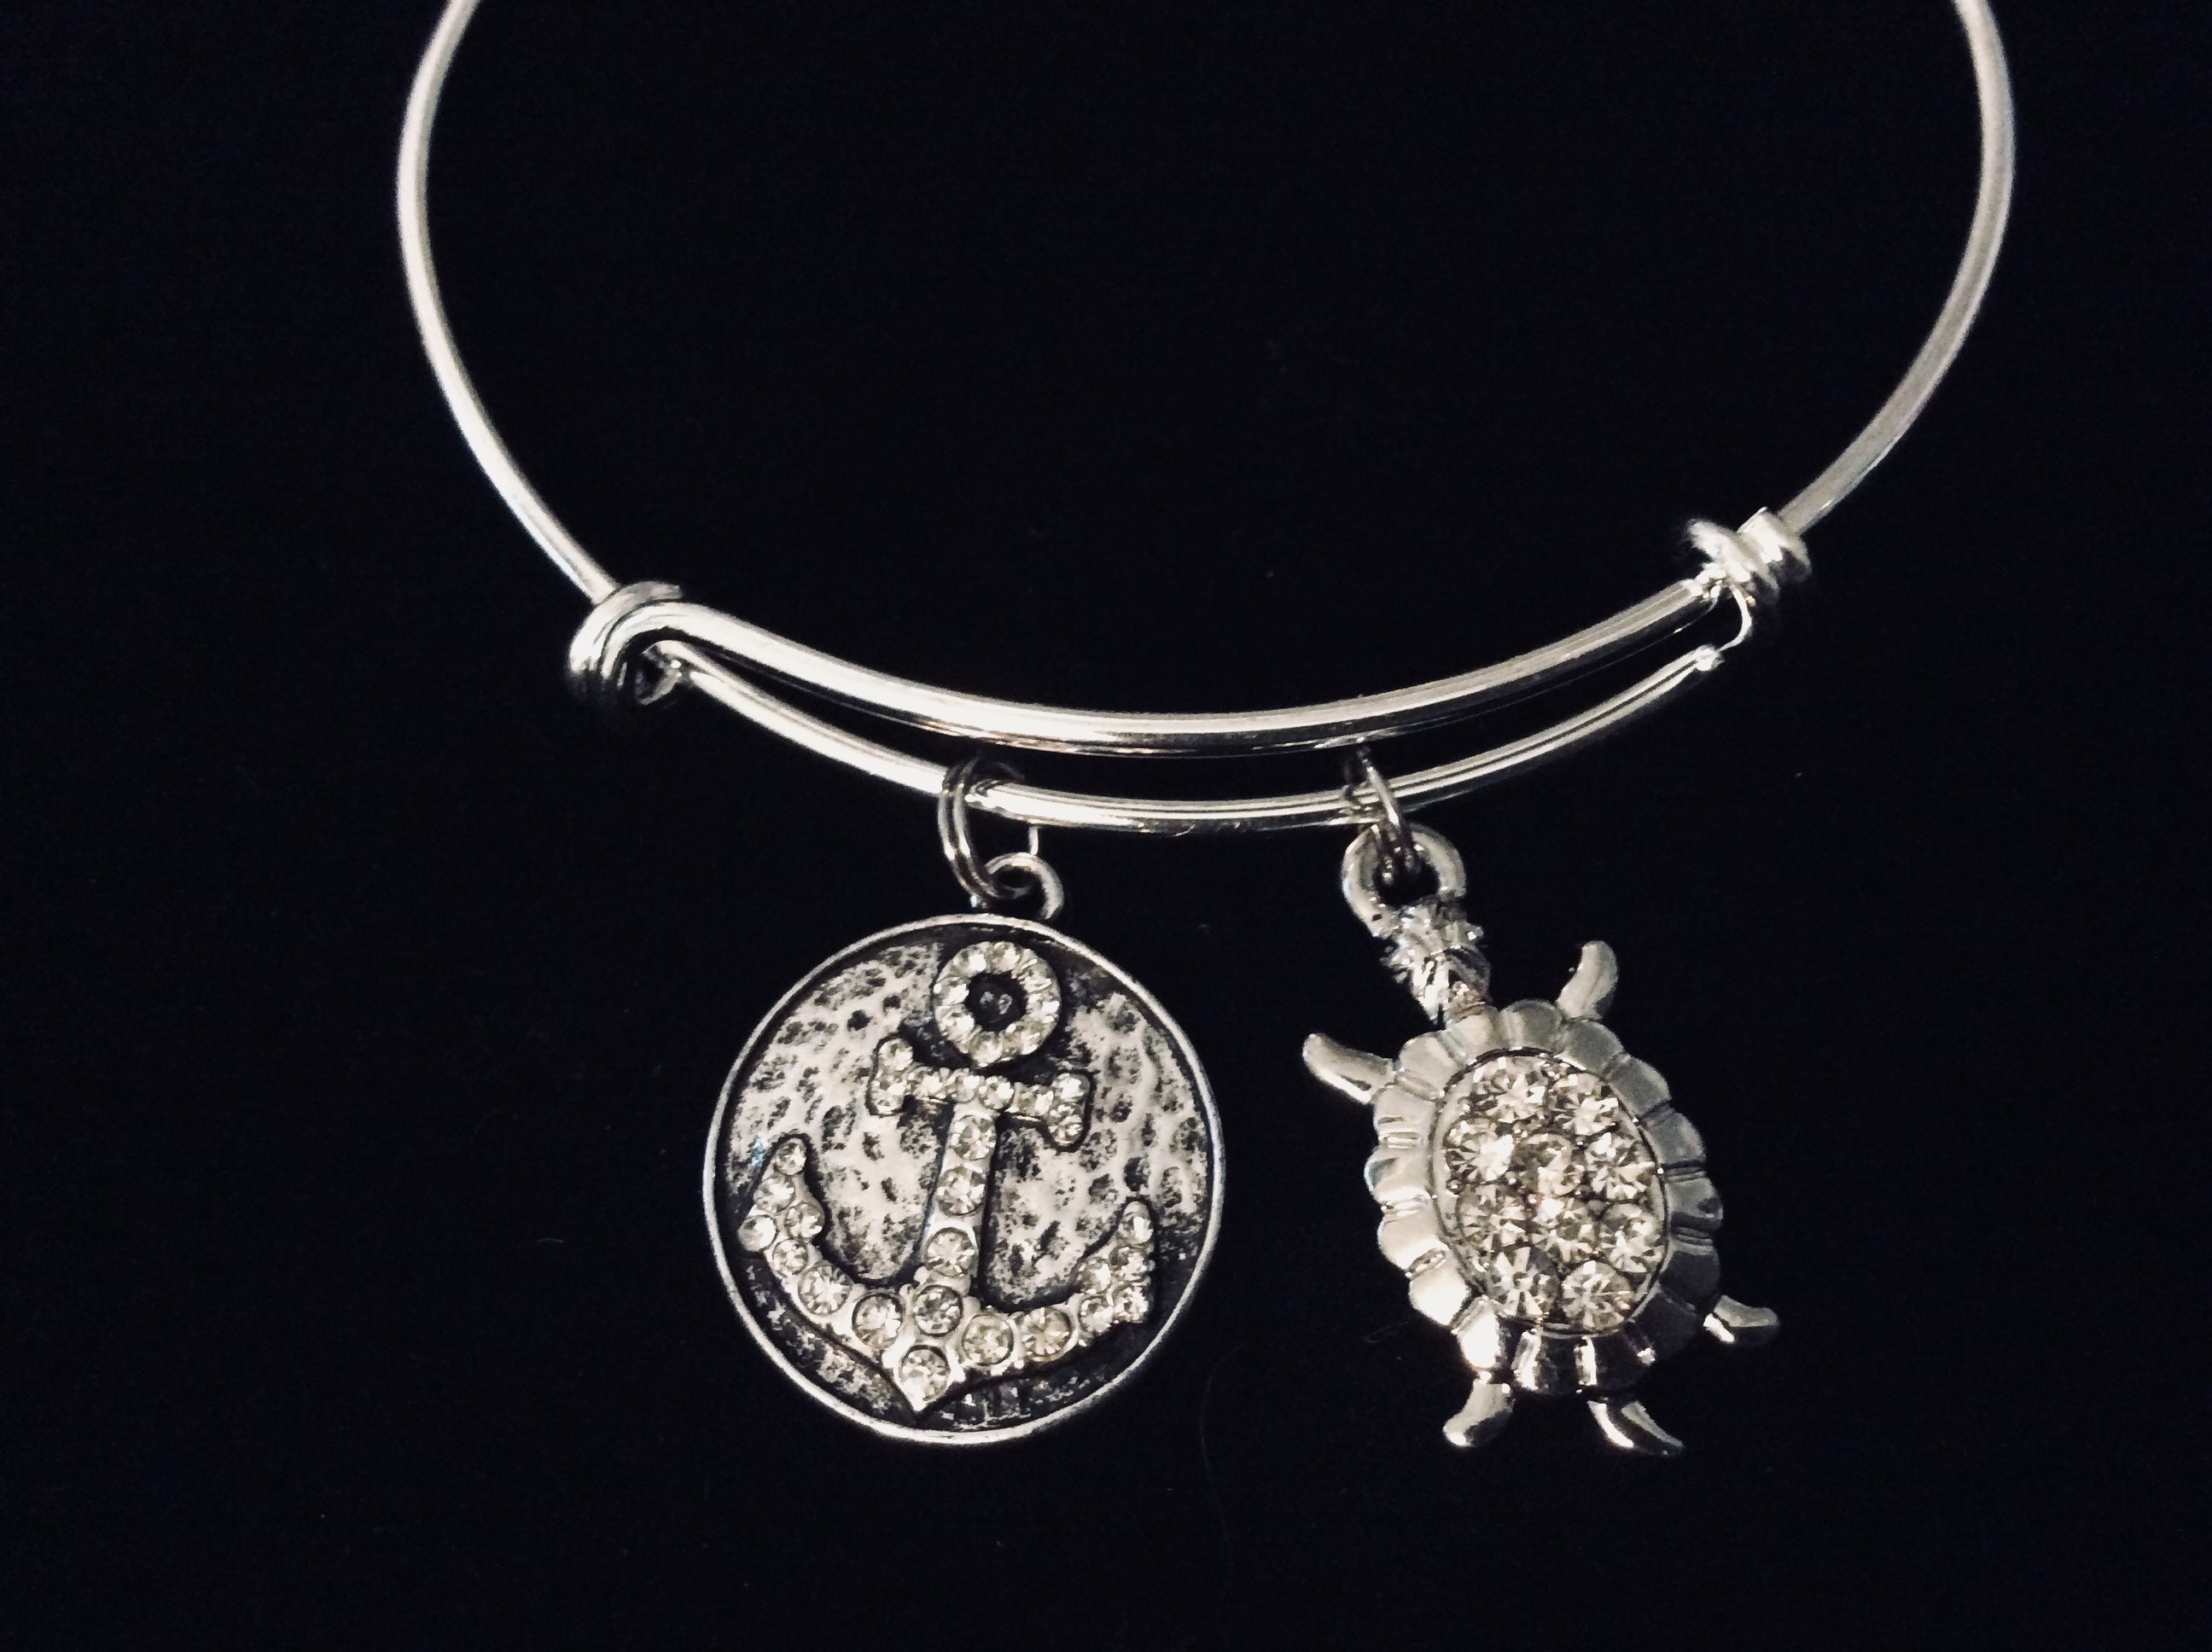 Crystal Anchor with Turtle Adjustable Bracelet Expandable Charm Bangle Ocean Nautical Vacation Jewel